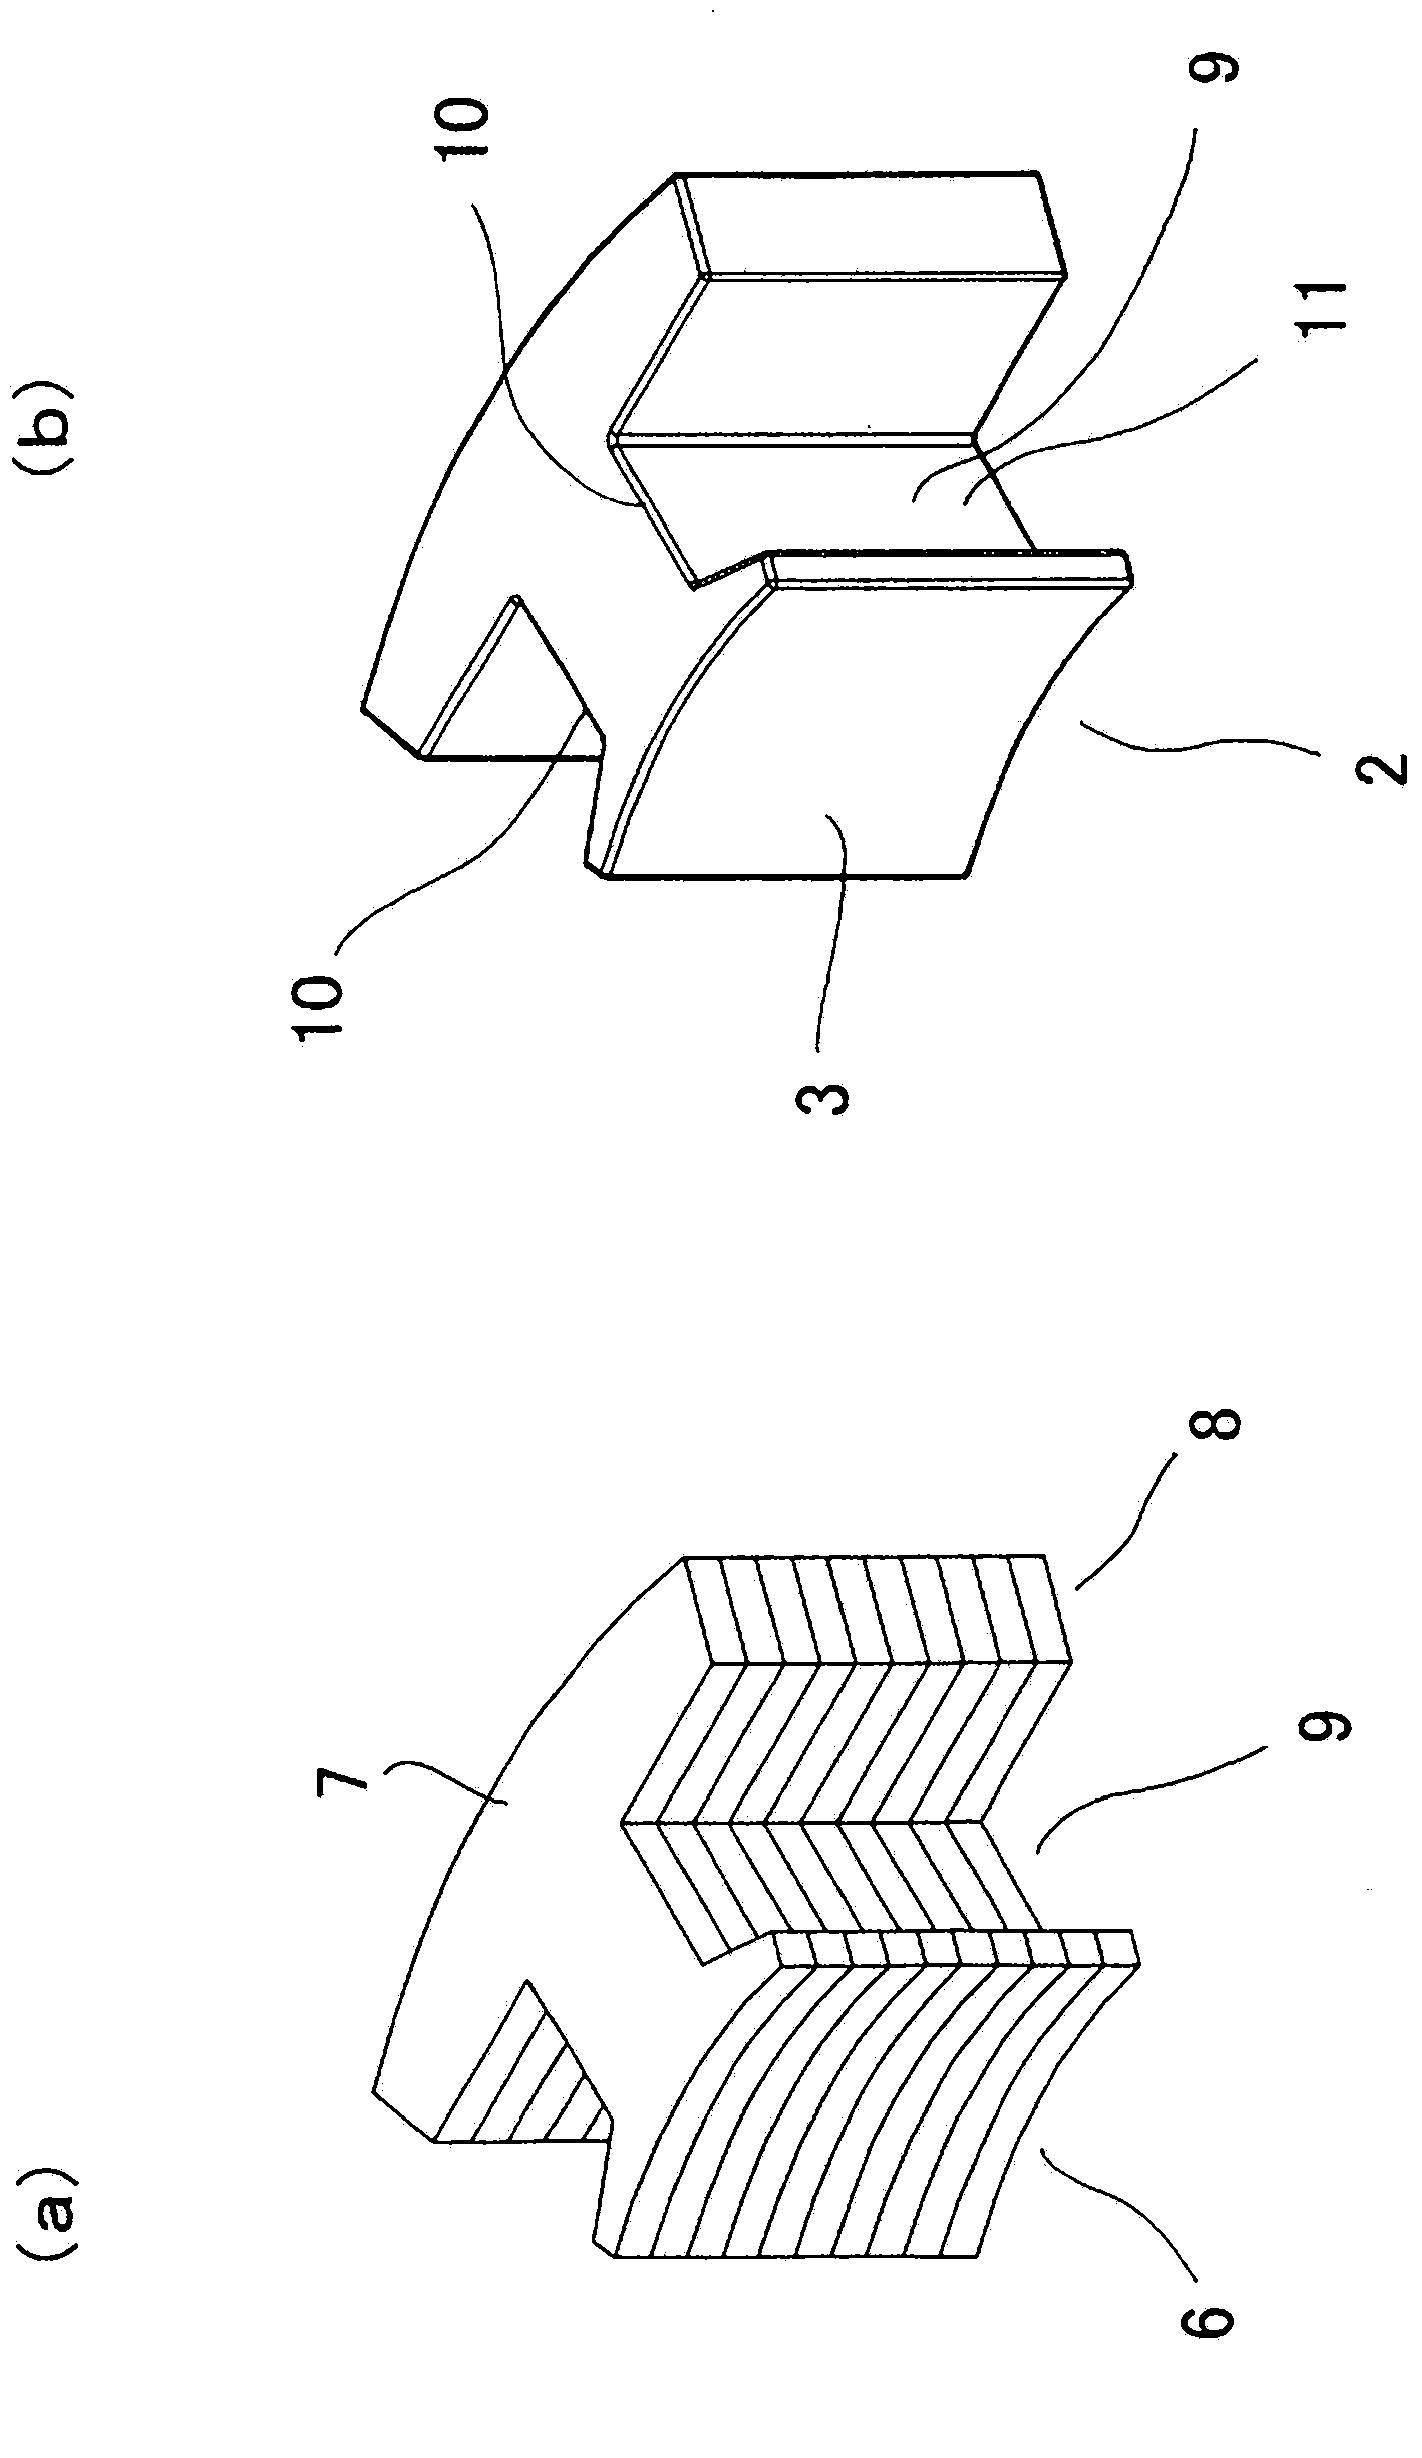 Stator for rotating electrical machine, and method for producing same